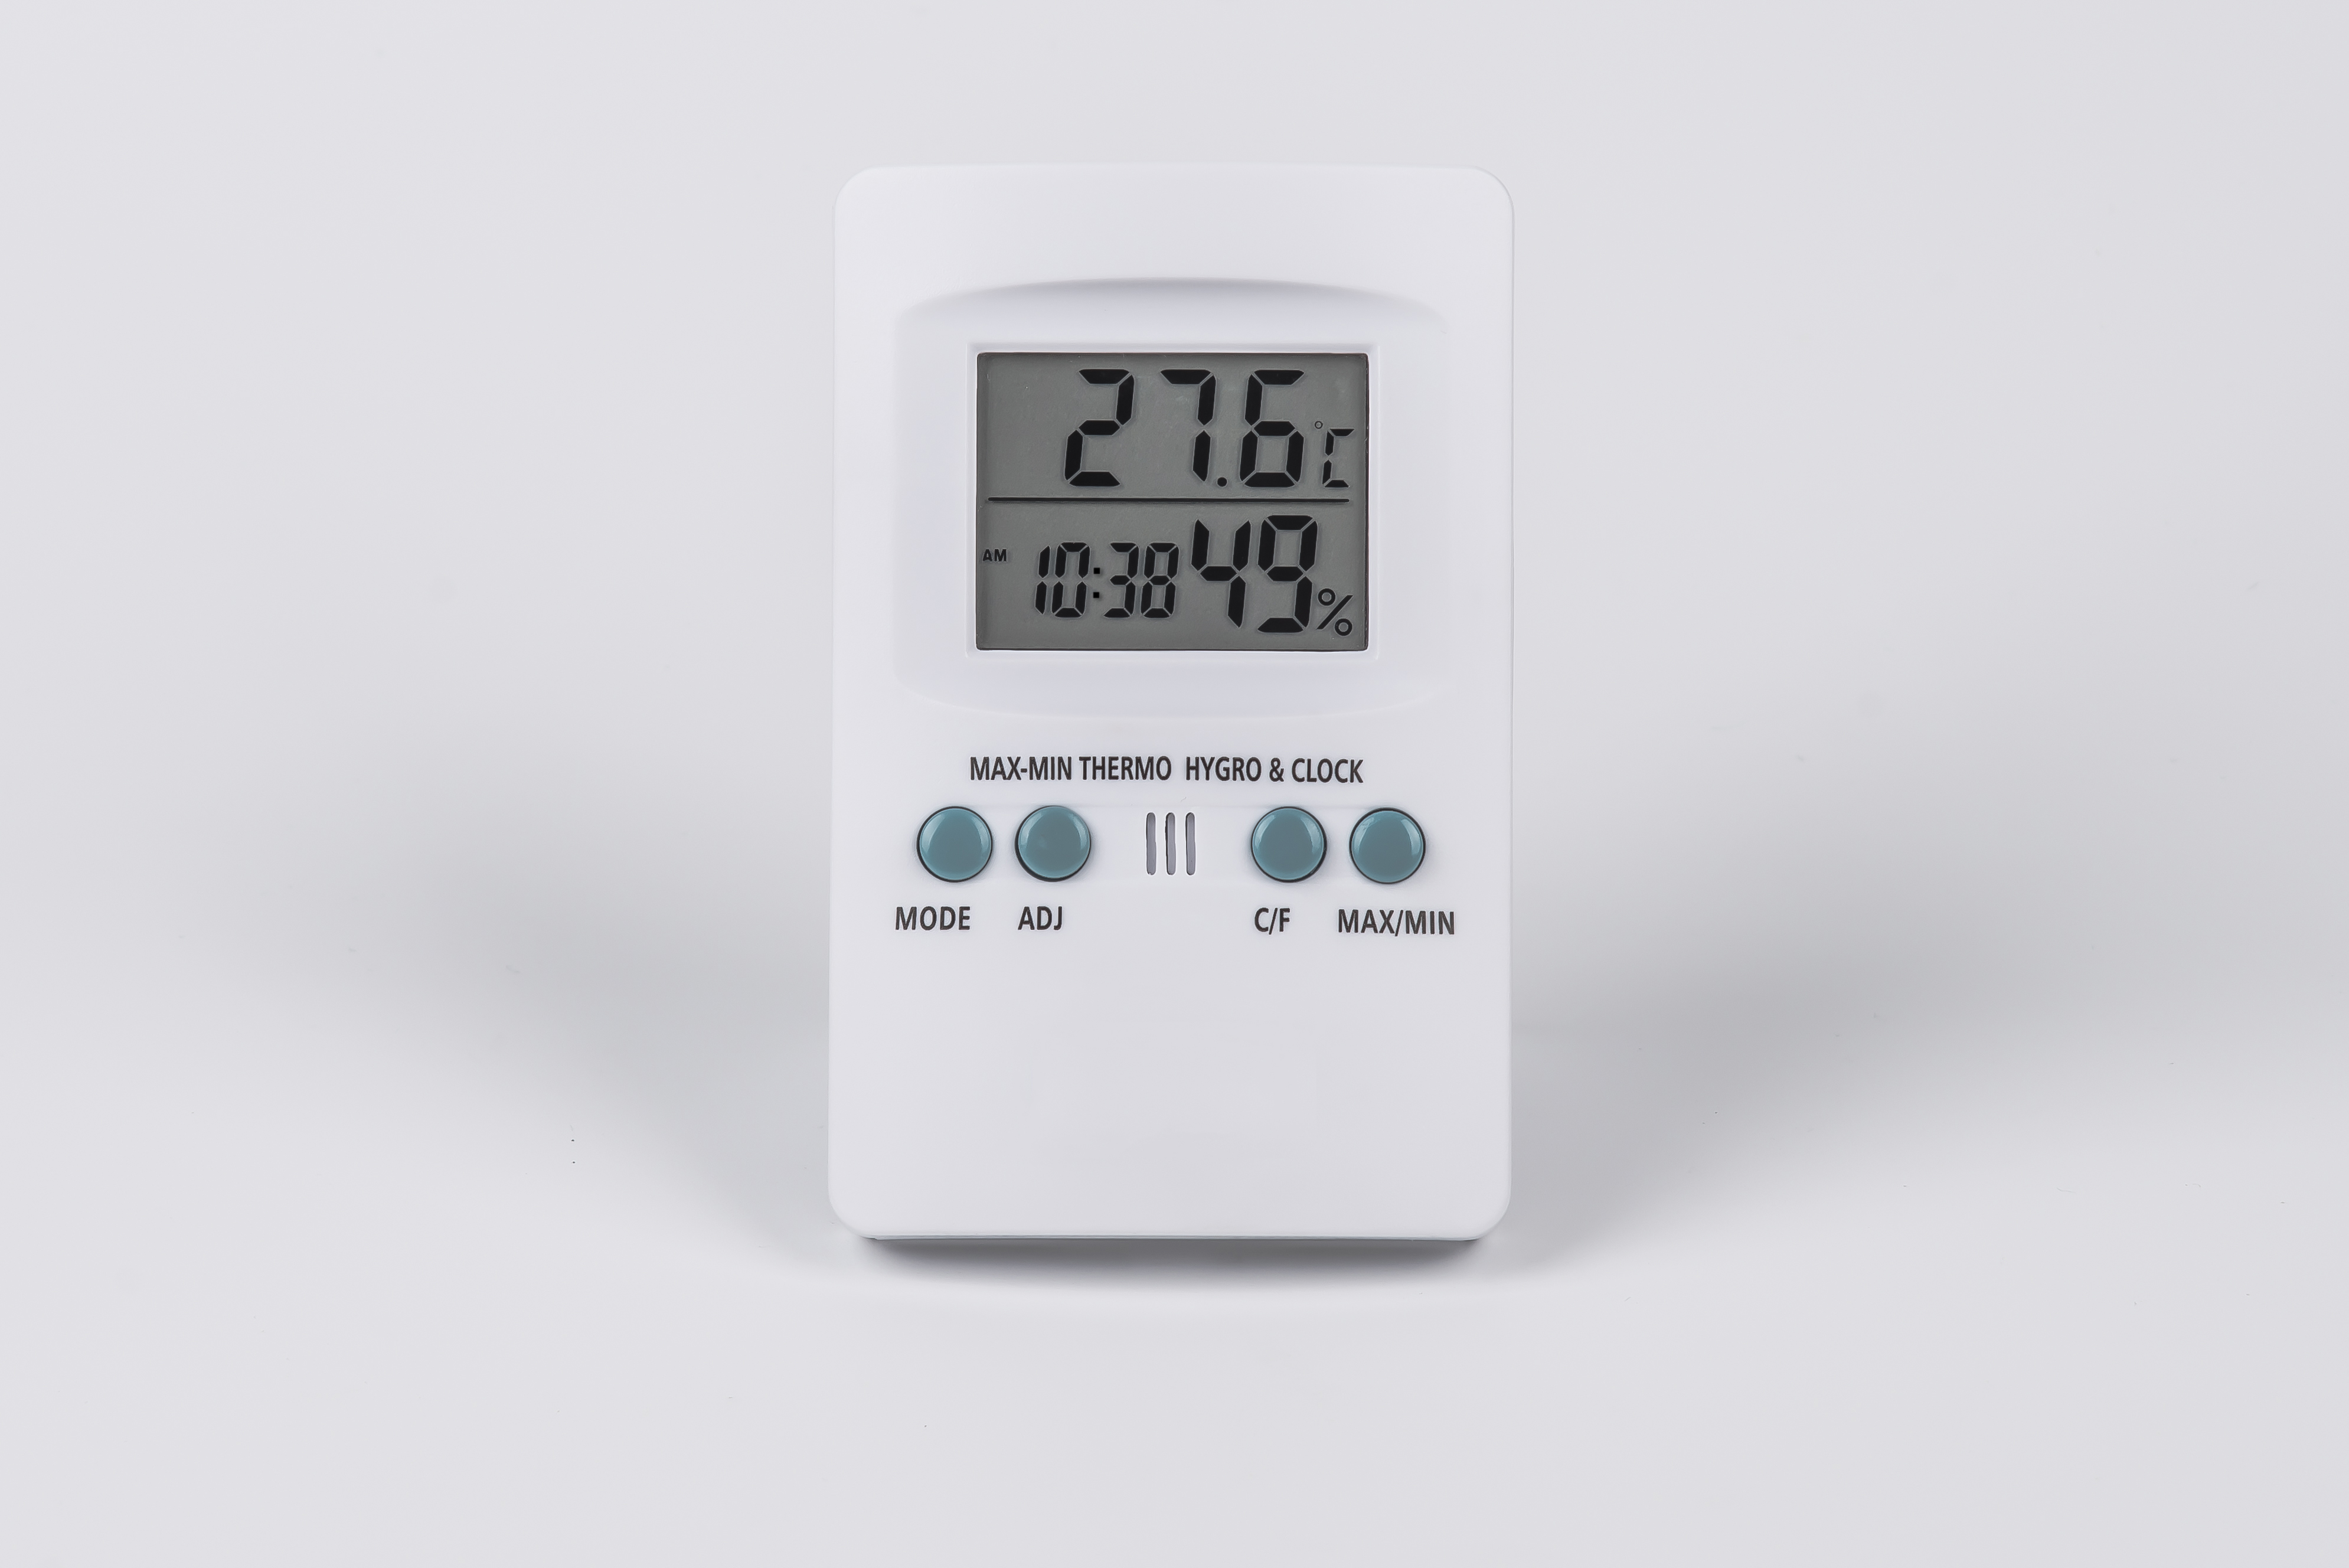 Digital Weather Thermometer